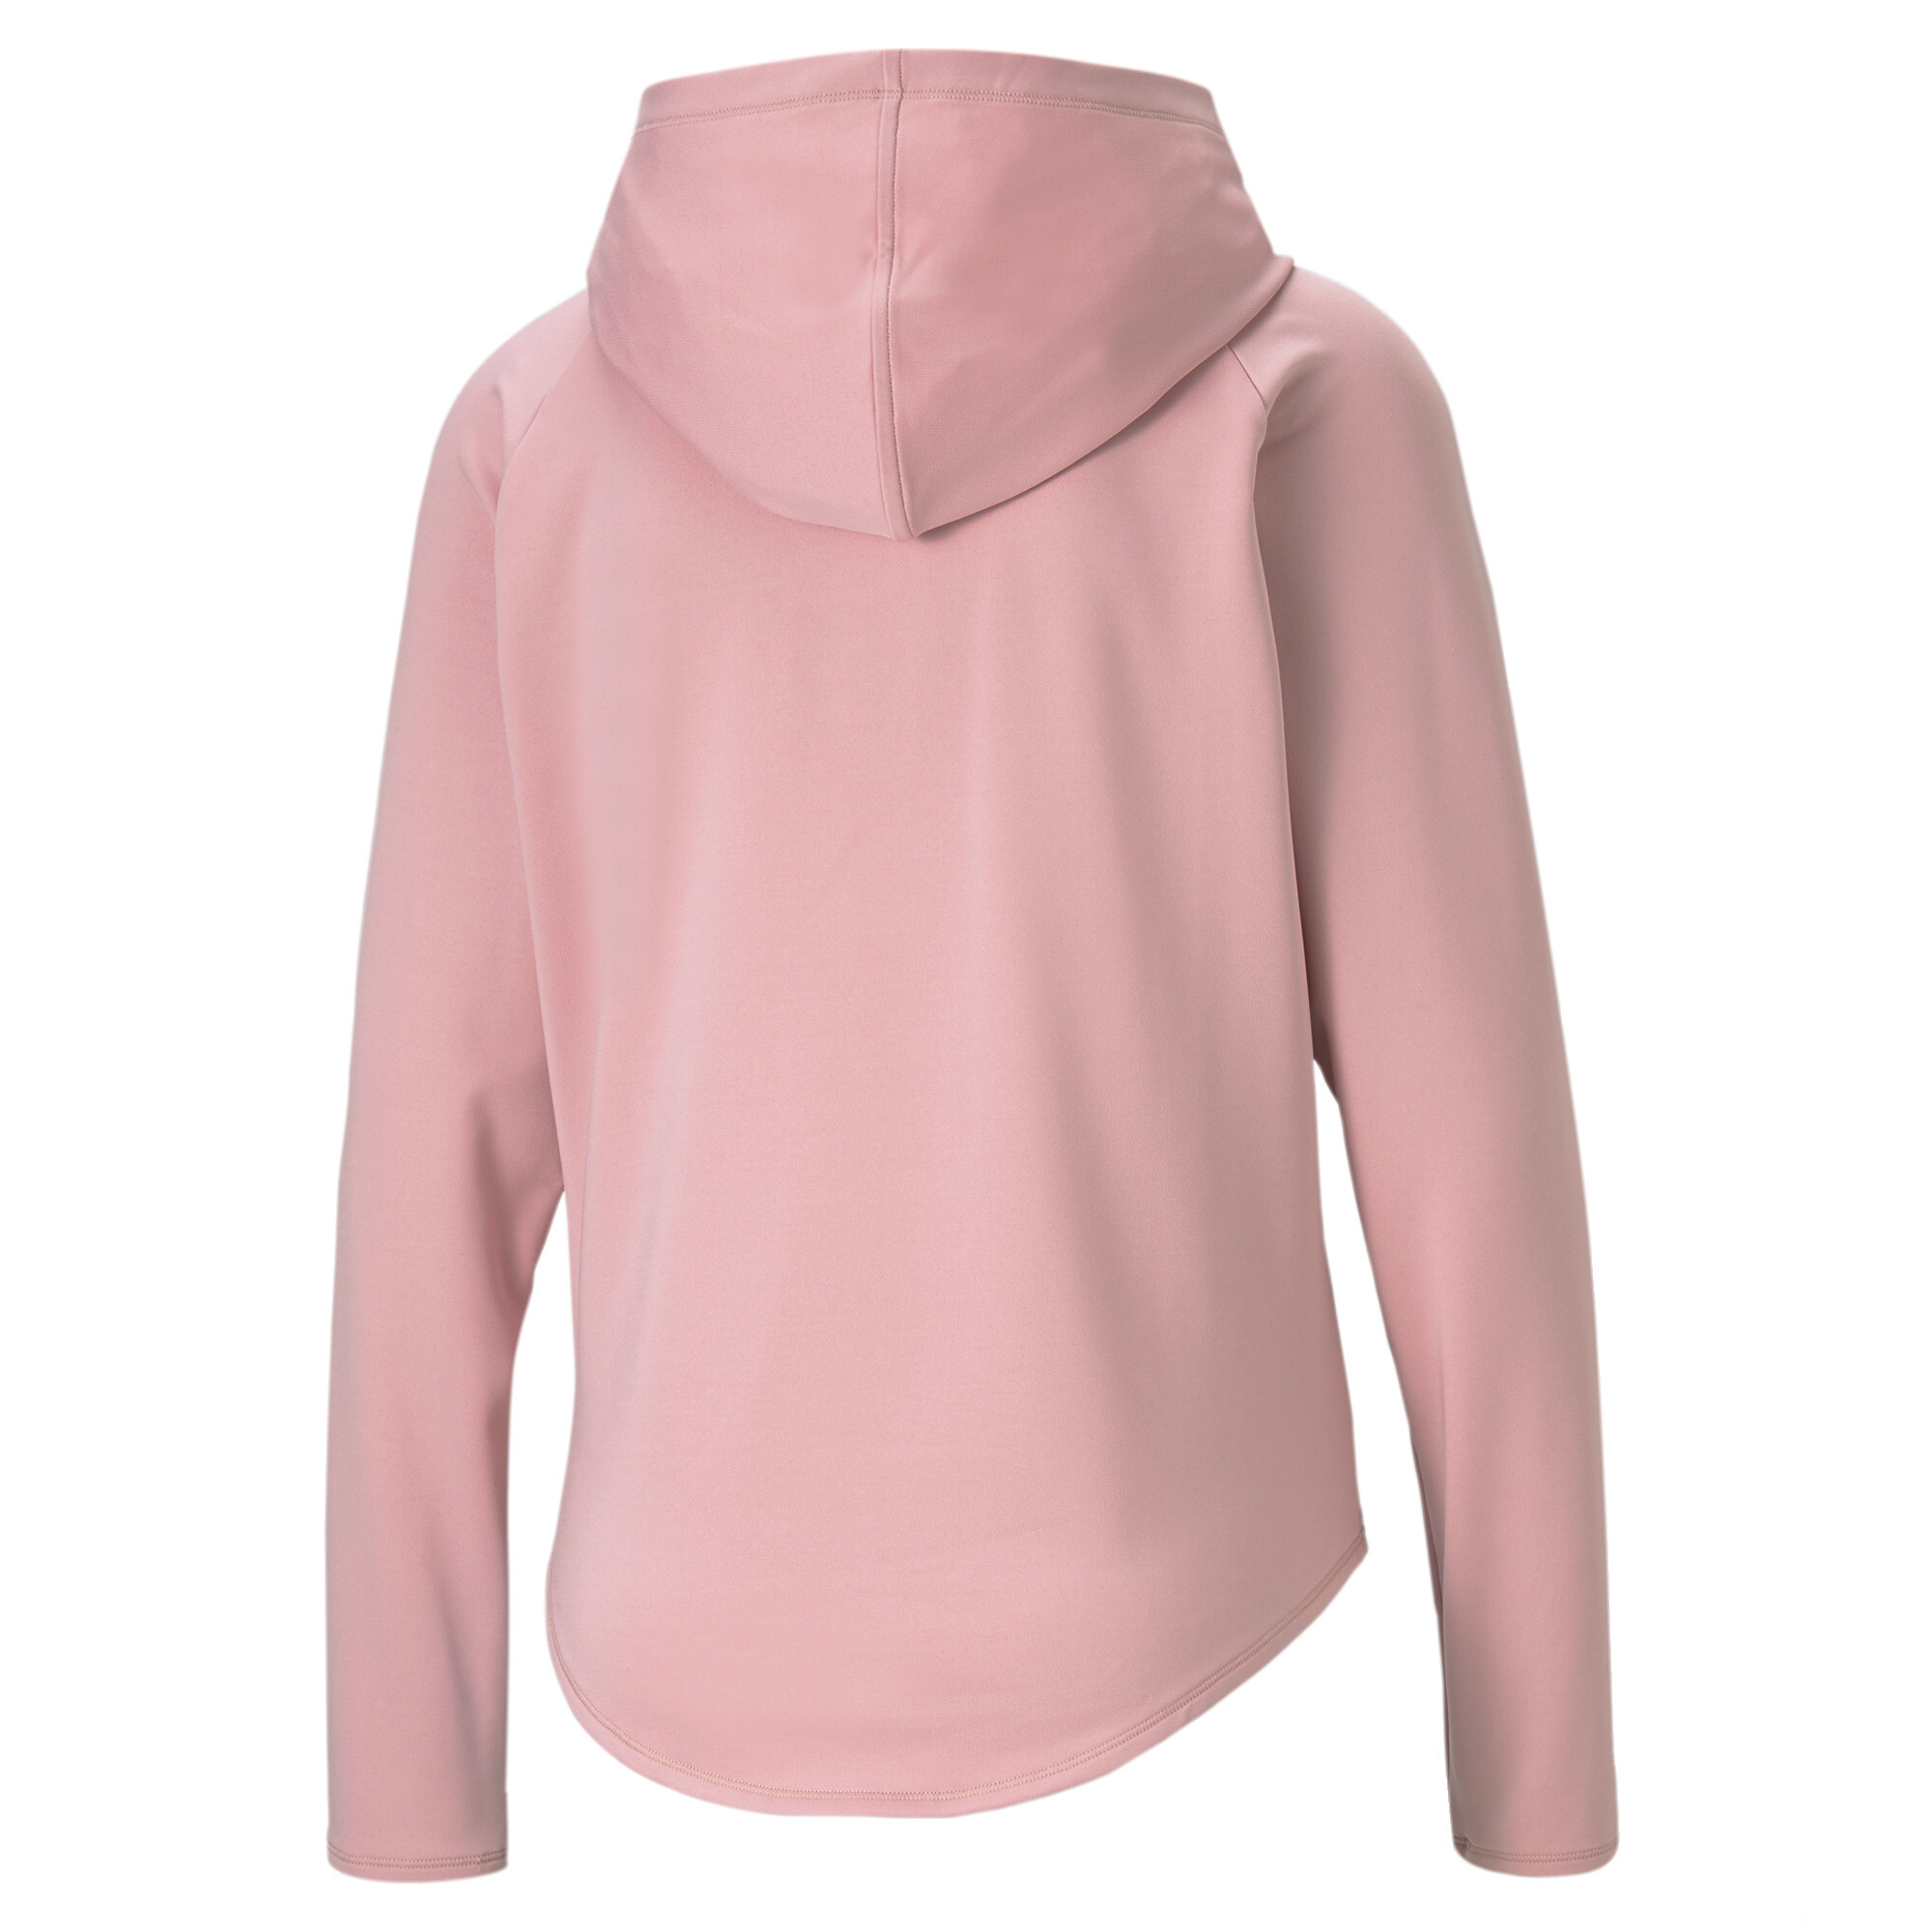 Women's Puma Active's Hoodie, Pink, Size S, Clothing